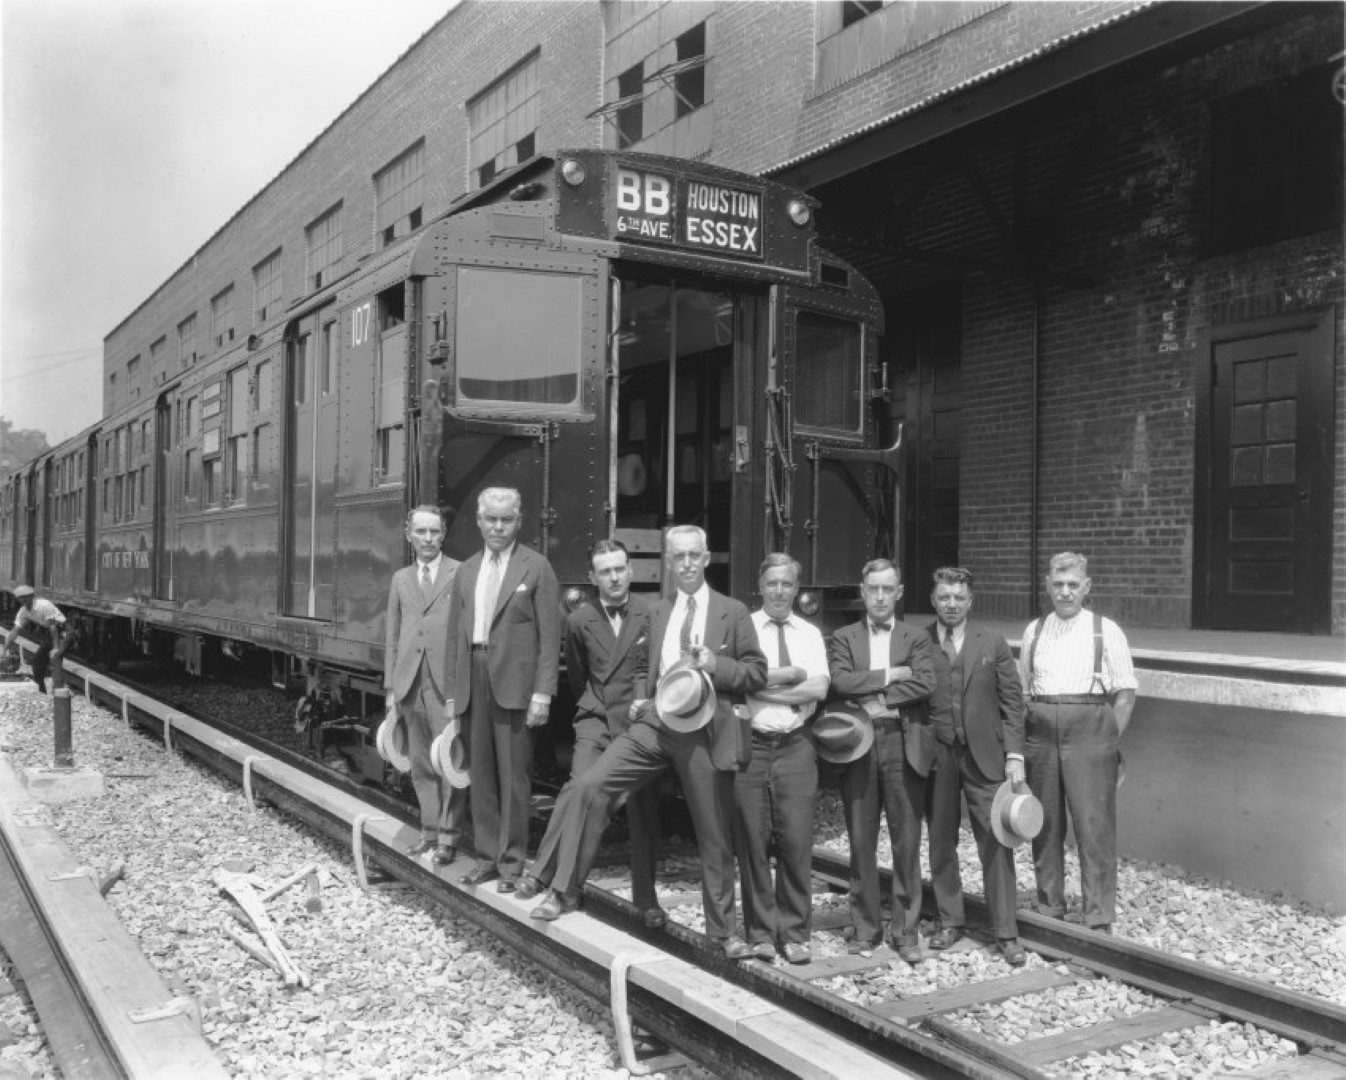 The first R-1 cars in the 207th Street Yard, 1930